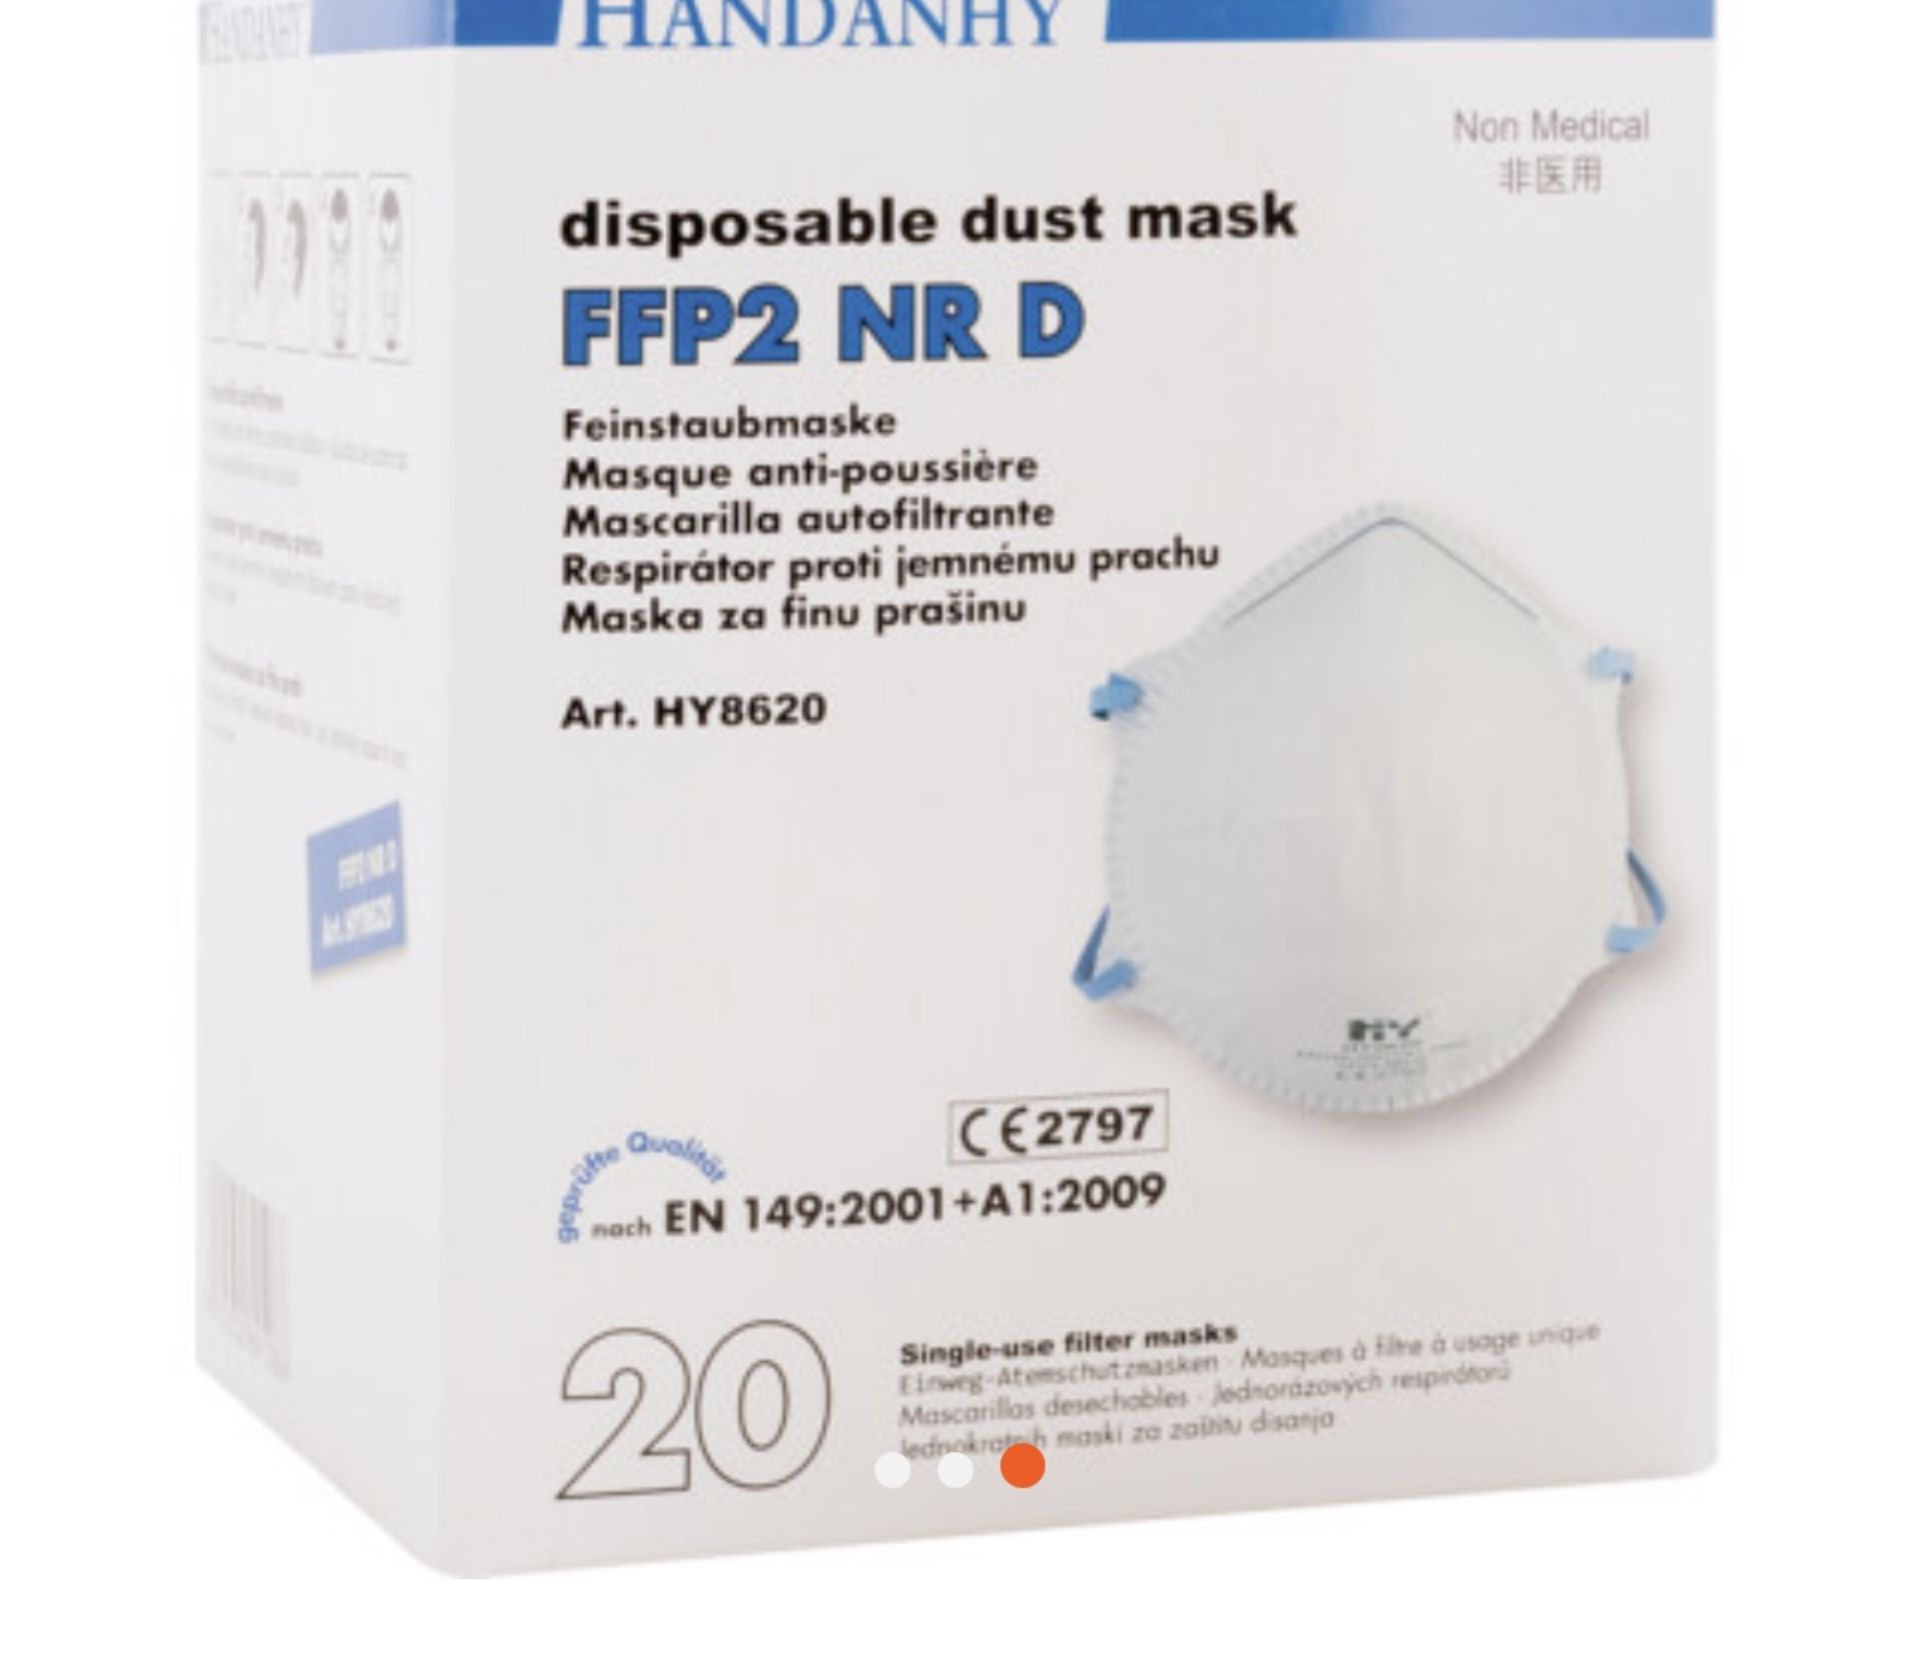 480 BOXES OF HANDANHY HY8620 FFP2 DUST PROTECTION FACE MASKS WORKWEAR 20pack - RRP £4.99, EXP 05/25